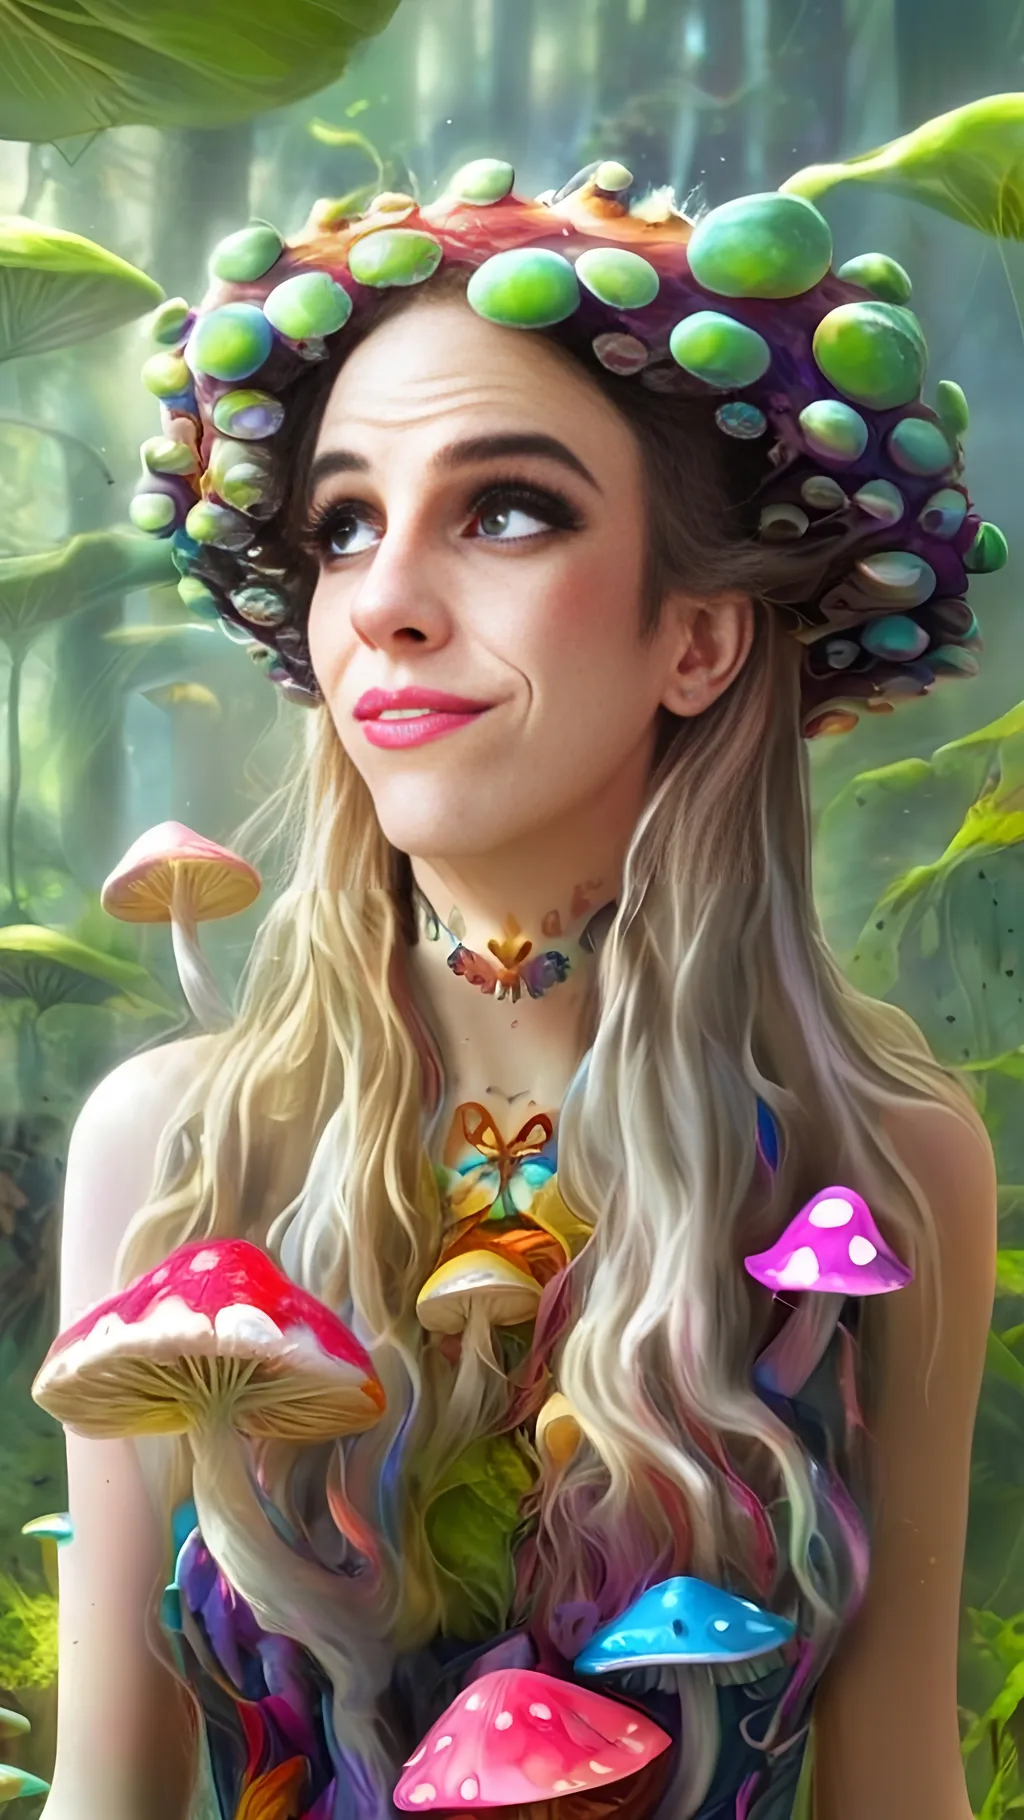 Prompt: A beautiful avant garde psychedelic mushroom  fairy queen with long curly blond hair, wearing clothing made out of fungus, mushroom fashionista, fungal fashions, mushroom accessories, liberty caps, psilocybe cubensis, rendred in a psychedelic hyperrealistic style